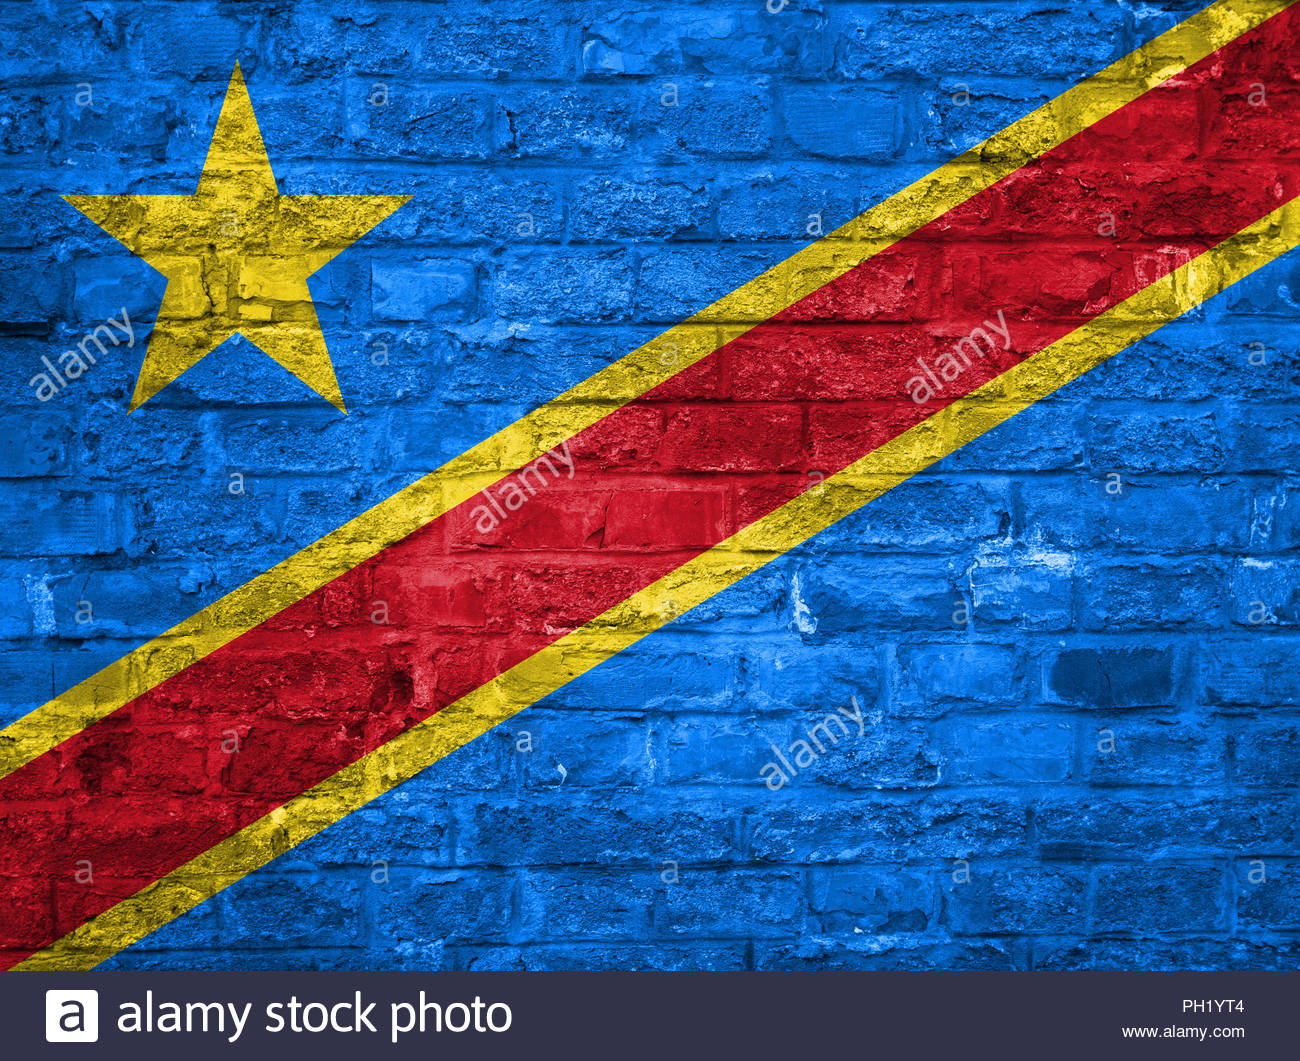 Flag Of Democratic Republic Congo Over An Old Brick Wall